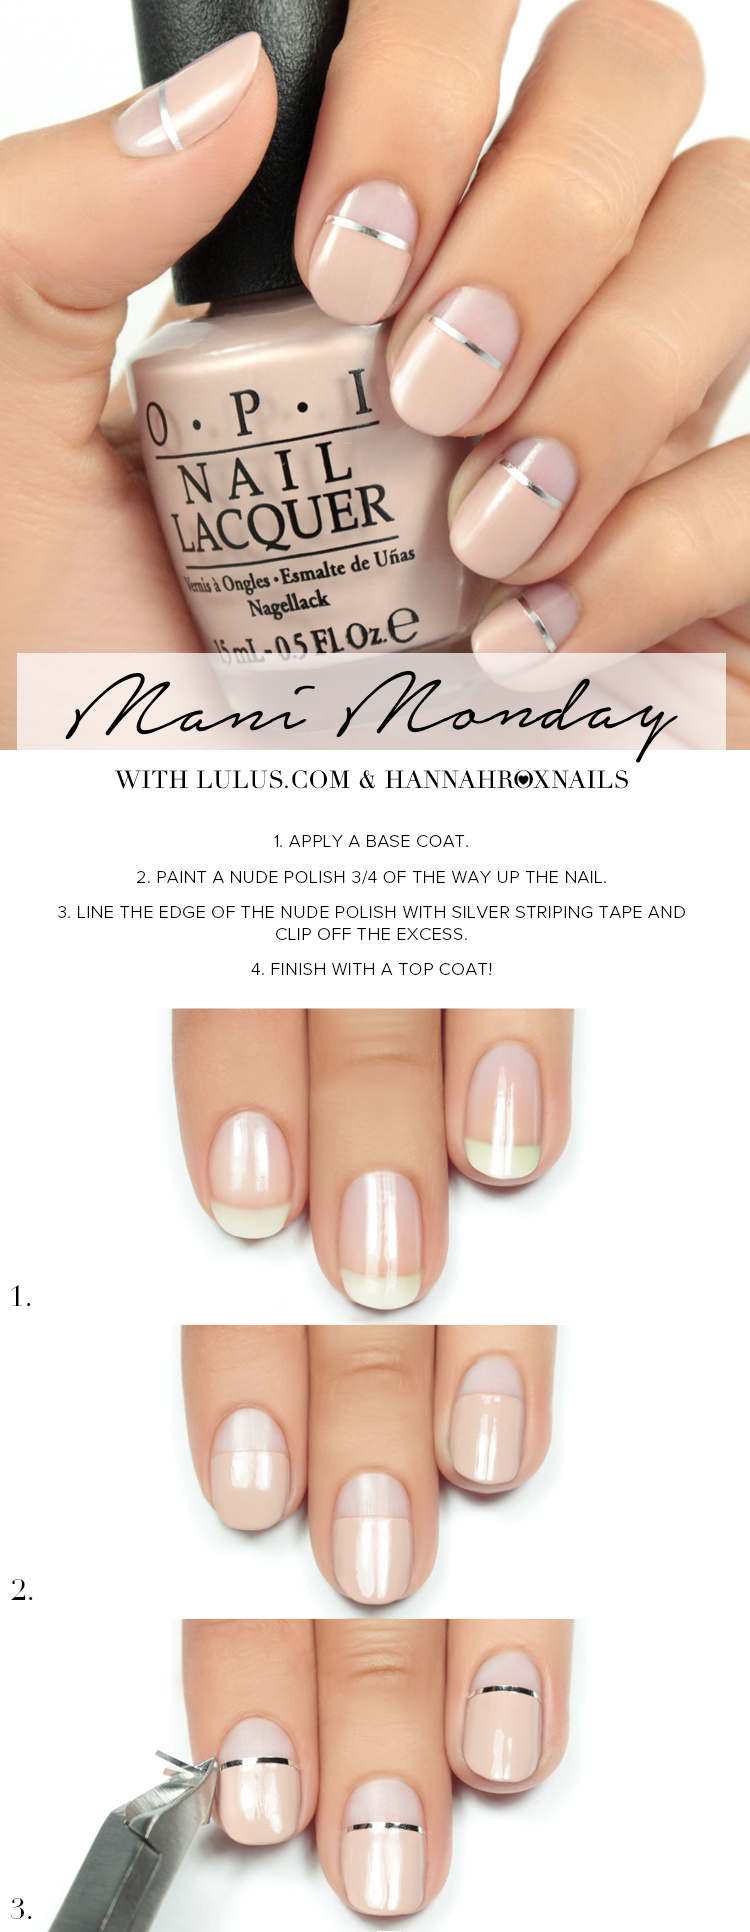 nude-nails-with-sliver-lines via